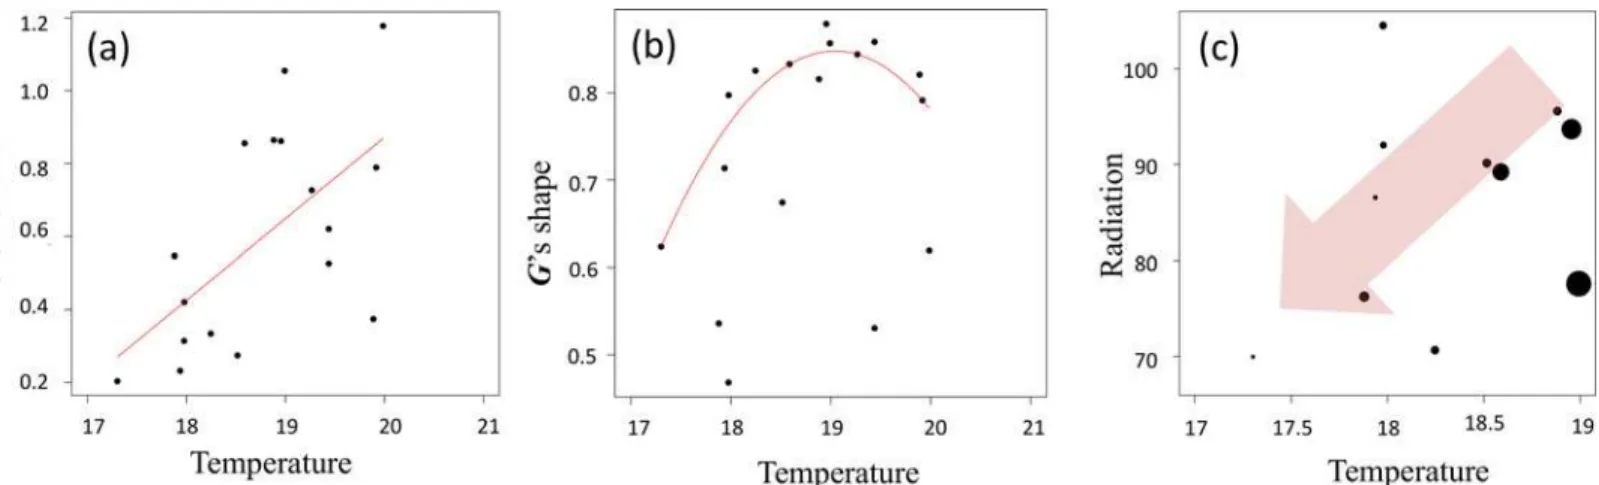 Fig 4. Phenotypic variance and integration across the species' niche as captured by the temperature gradient